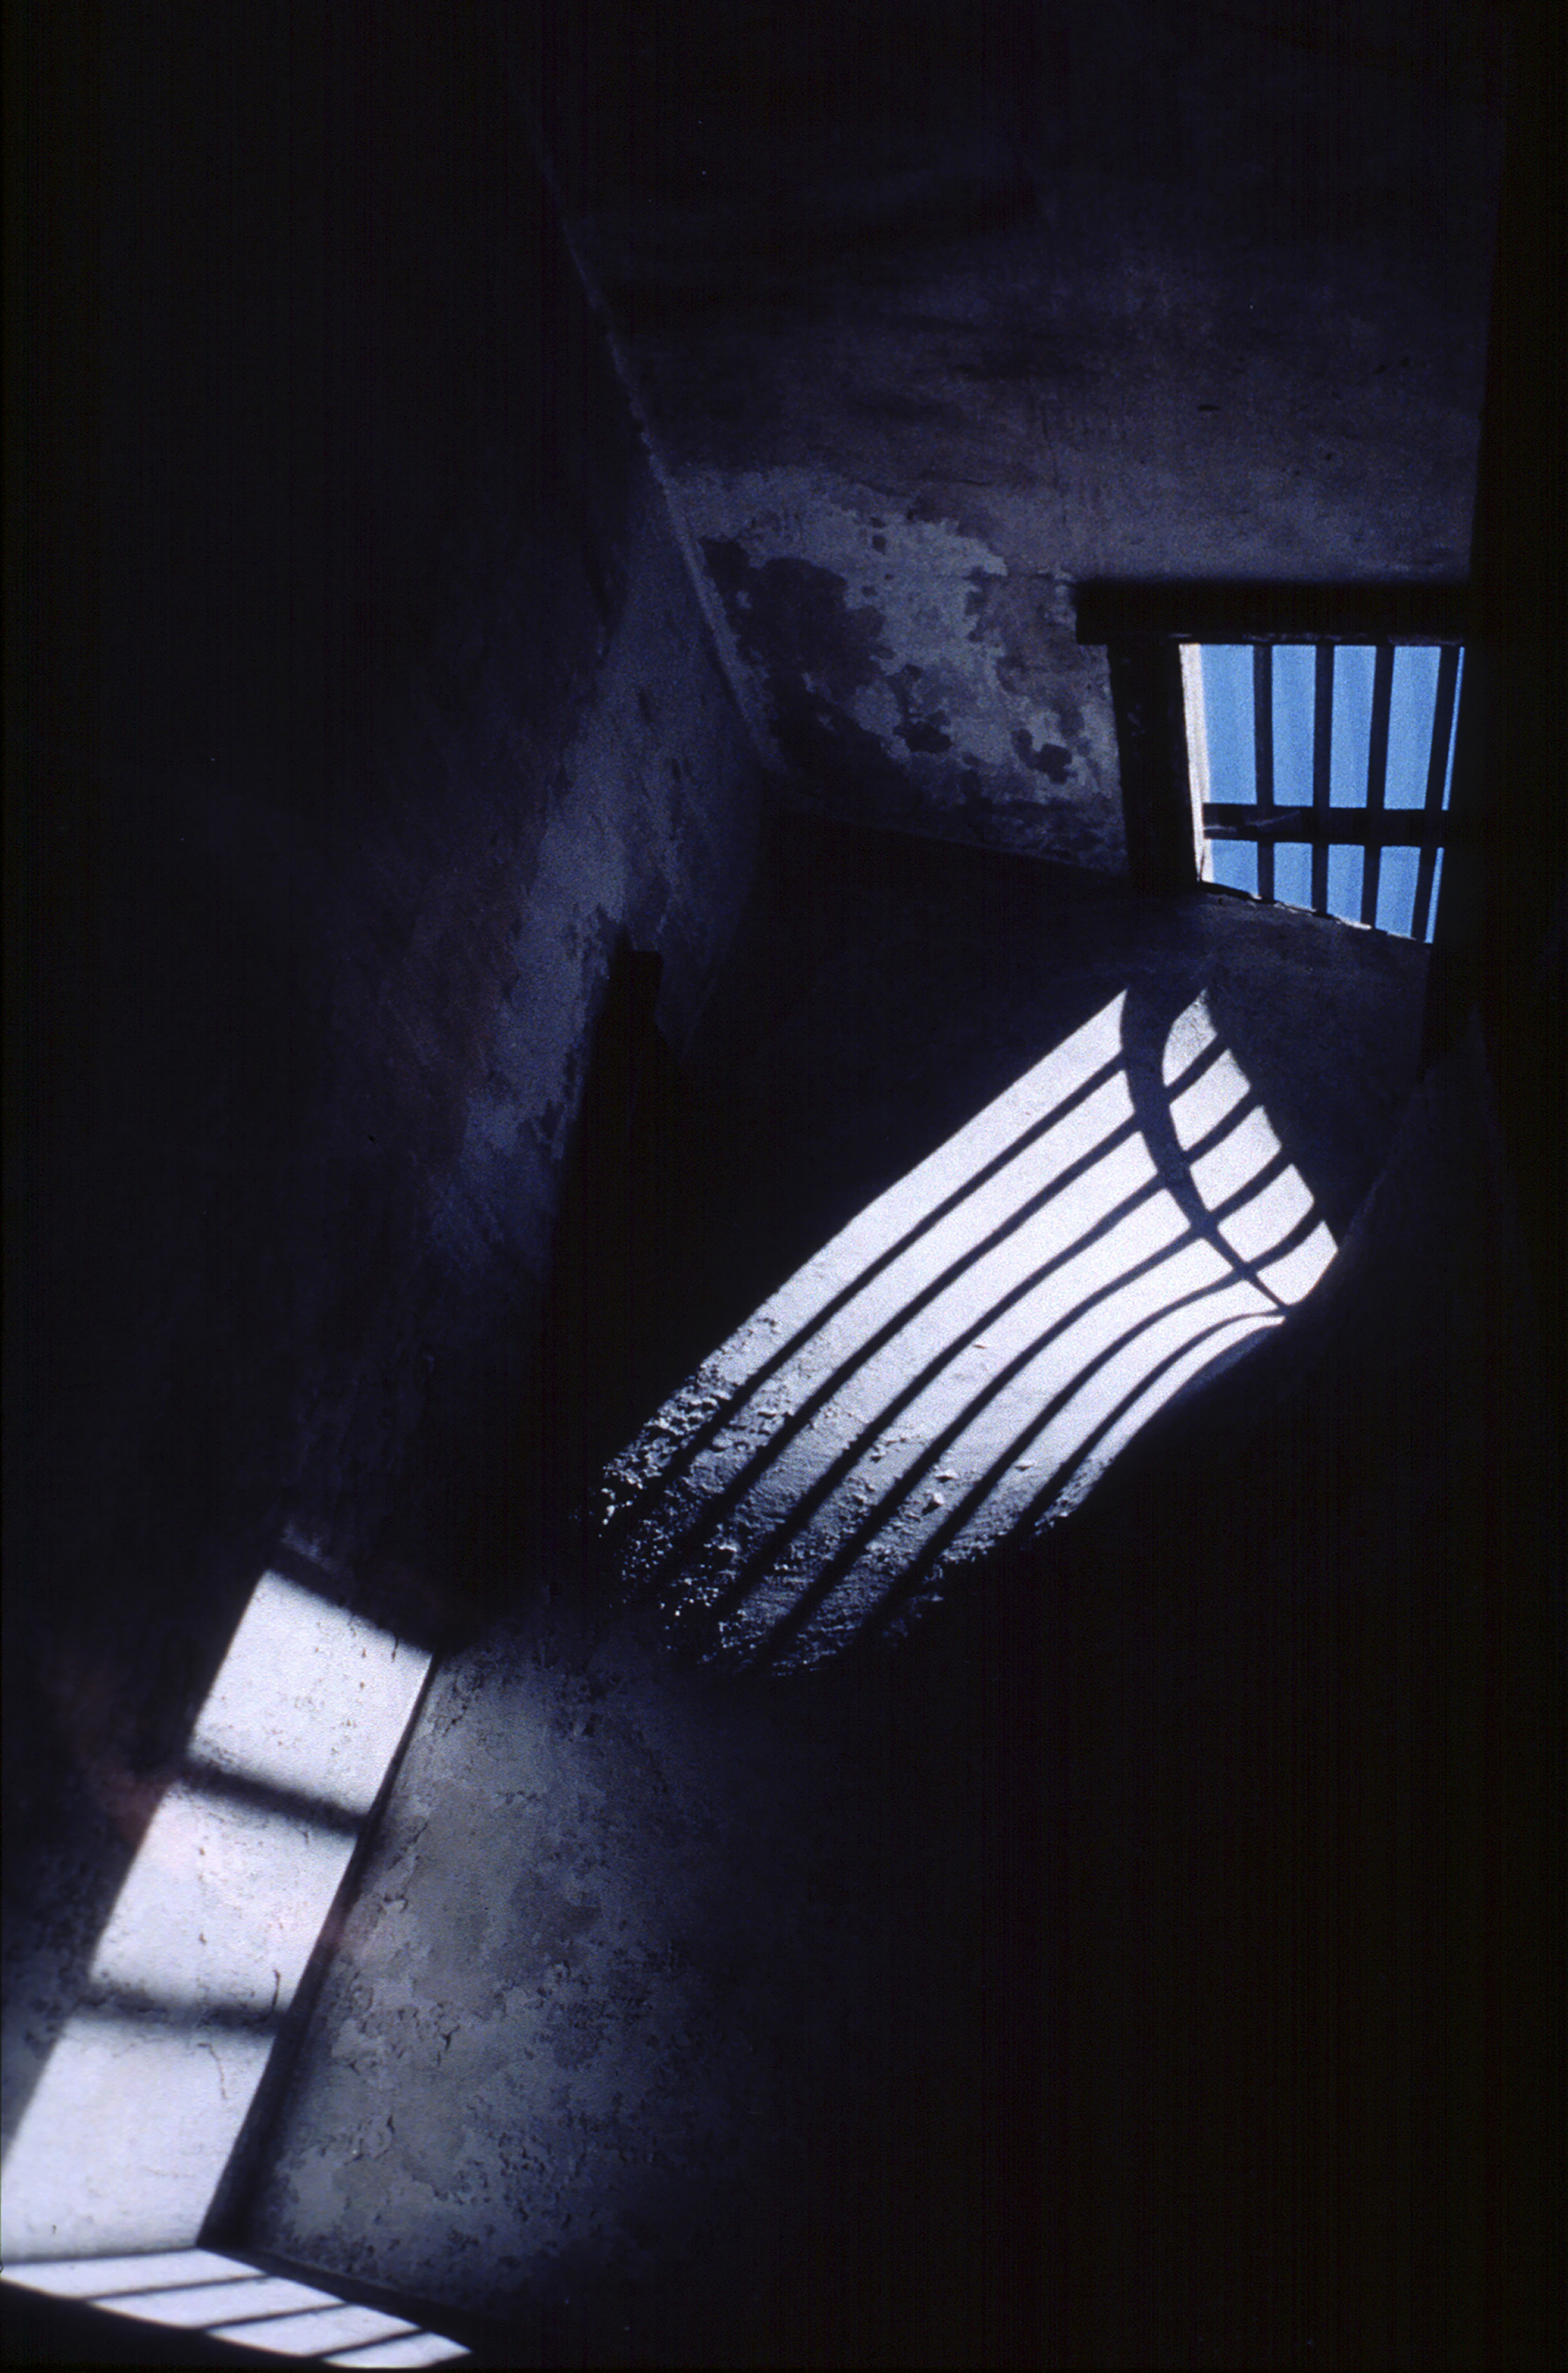 3rd Place & Curator's Award: Lesley Price "Old Jail"